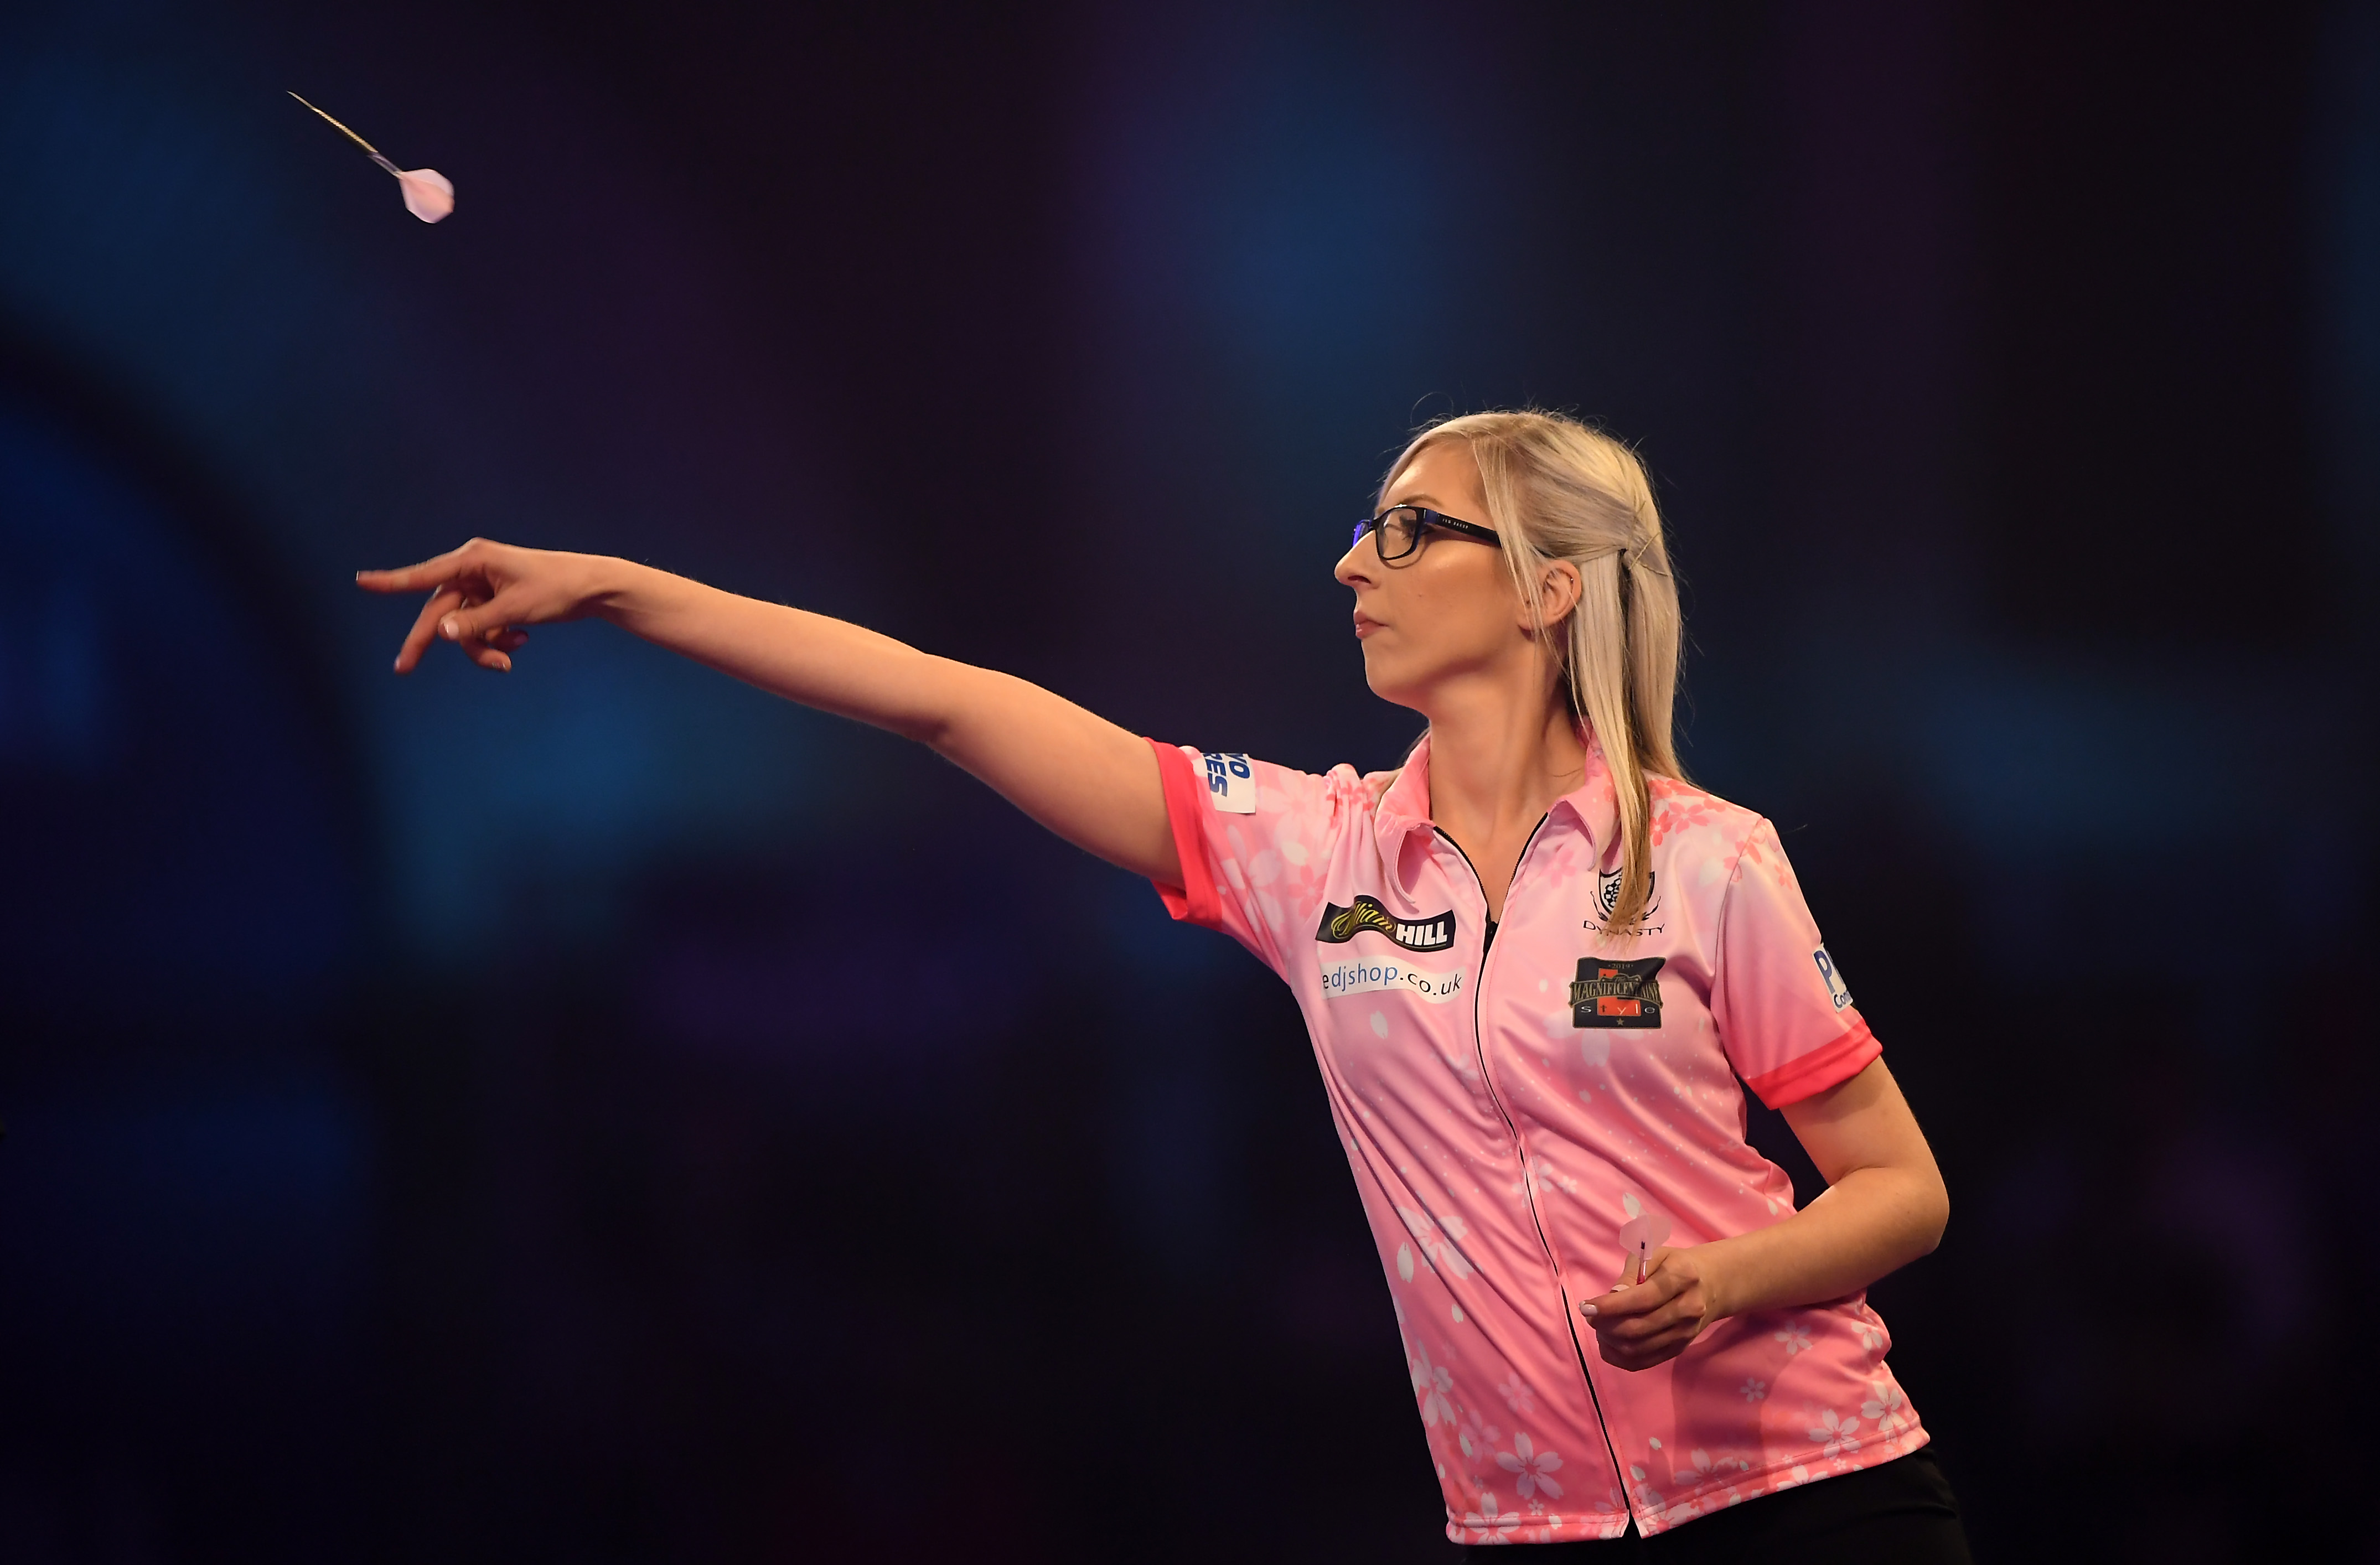 Fallon Sherrock in action during her 1st round game against Ted Evetts during Day 5 of the 2020 William Hill Darts Championship at Alexandra Palace on Dec. 17, 2019 in London, England. (Alex Davidson—Getty Images)